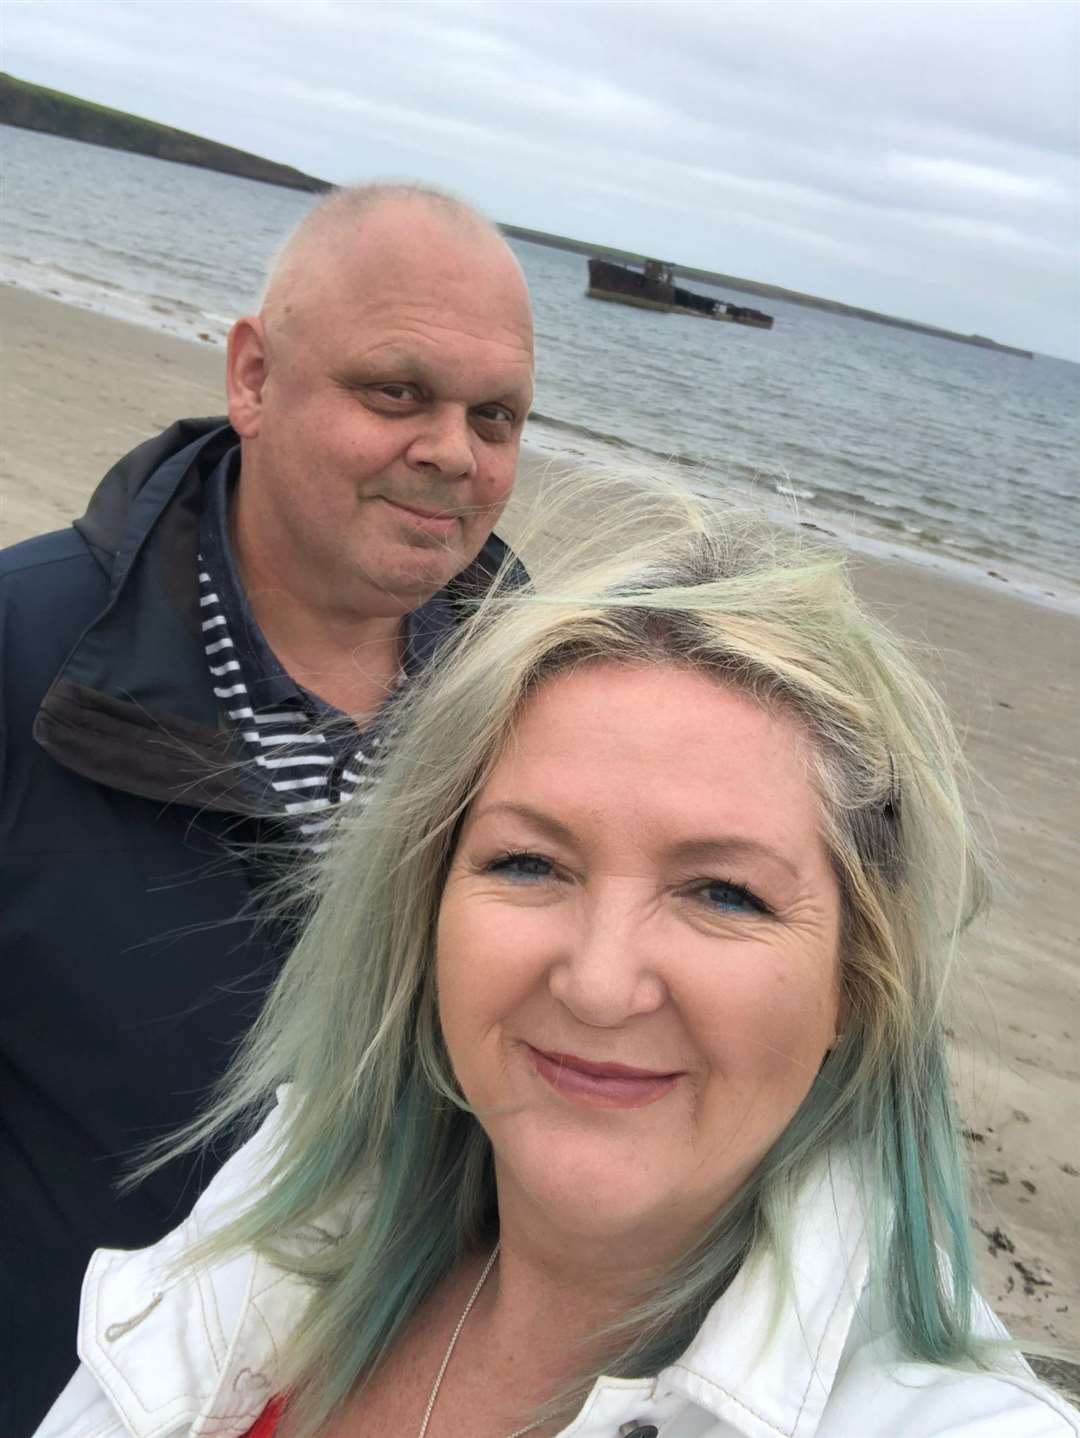 Stuart and Ruth continued to make the most of their time together after his cancer diagnosis.